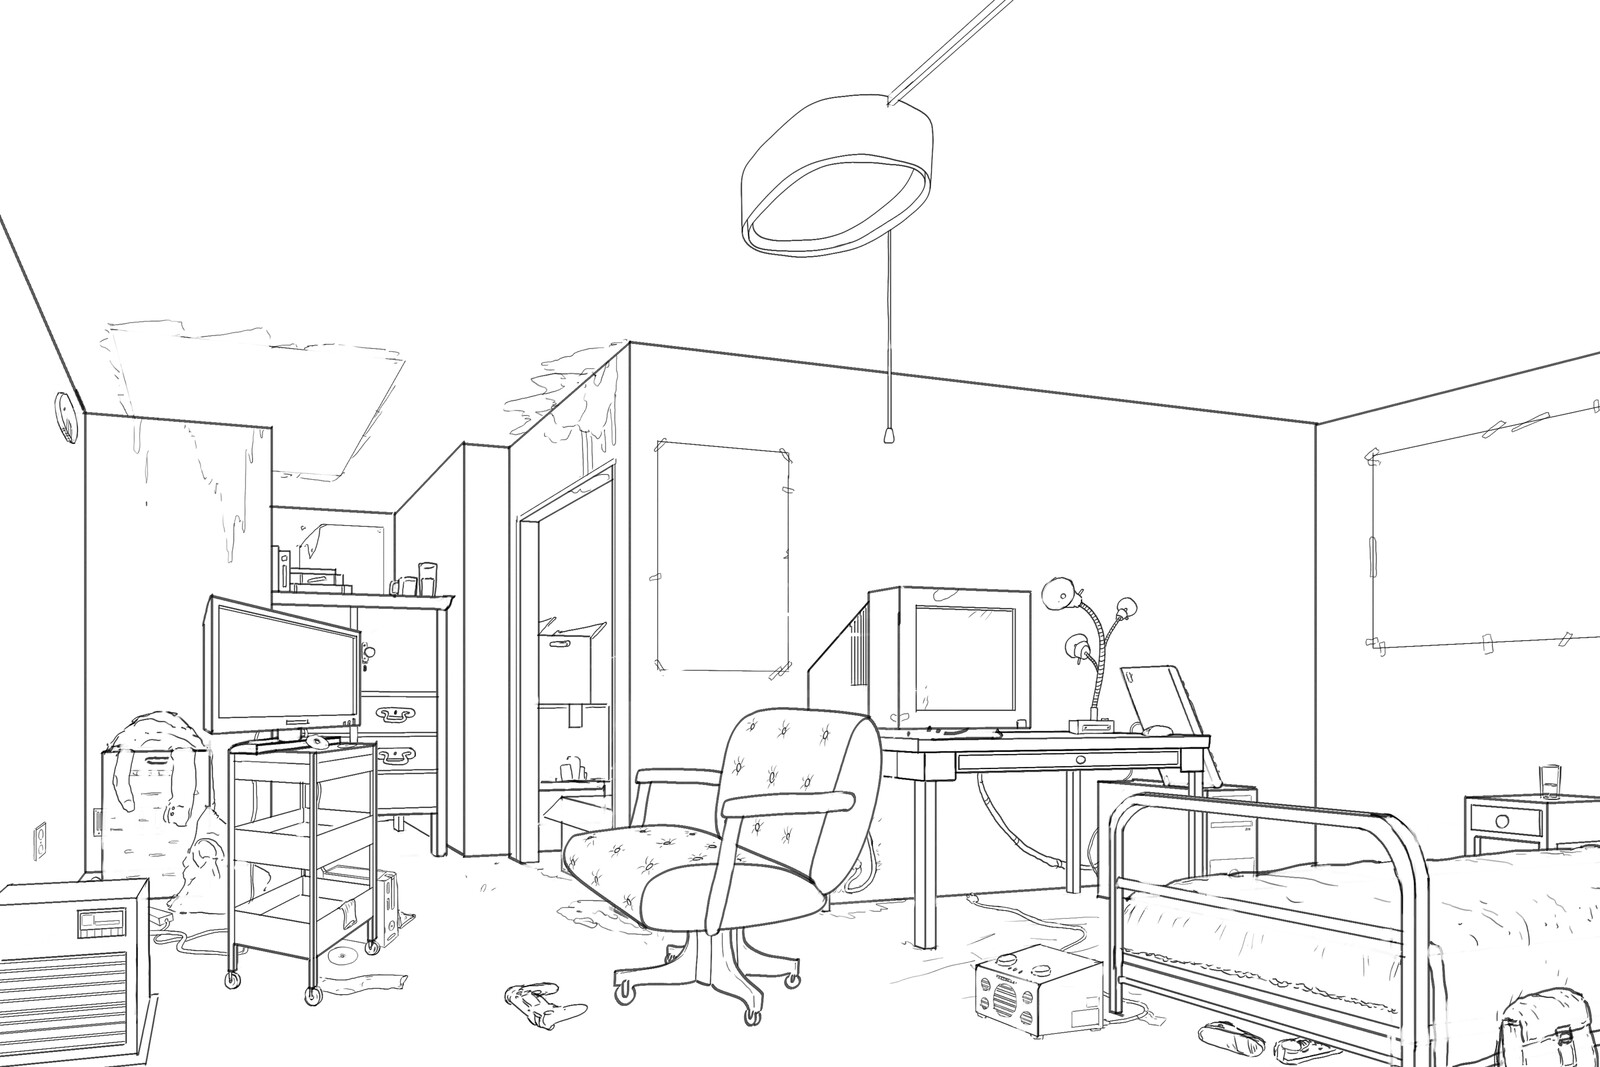 Perspective drawing that focused on local scale. The illustration prompt was to draw a bedroom.